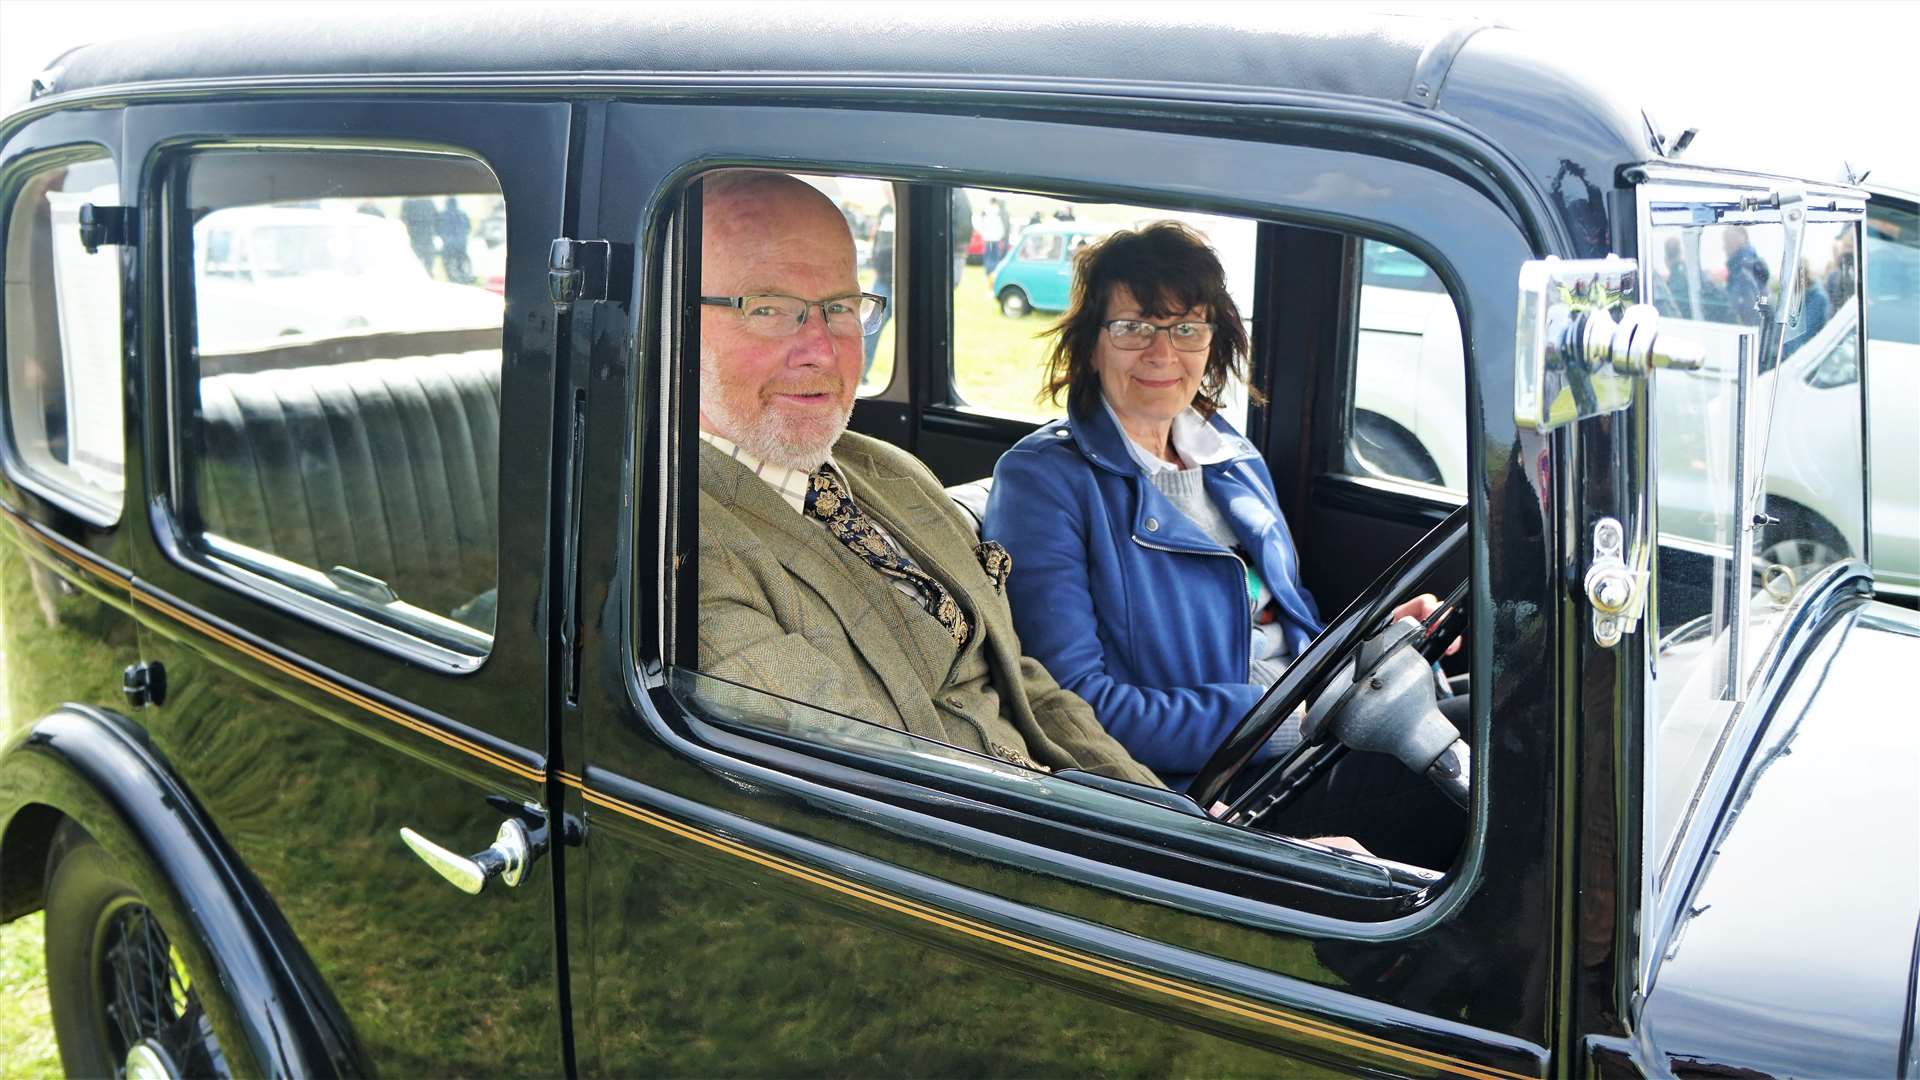 Jim Macgregor from Latheron Mains and his wife Rhona in their 1930s Austin. Picture: DGS